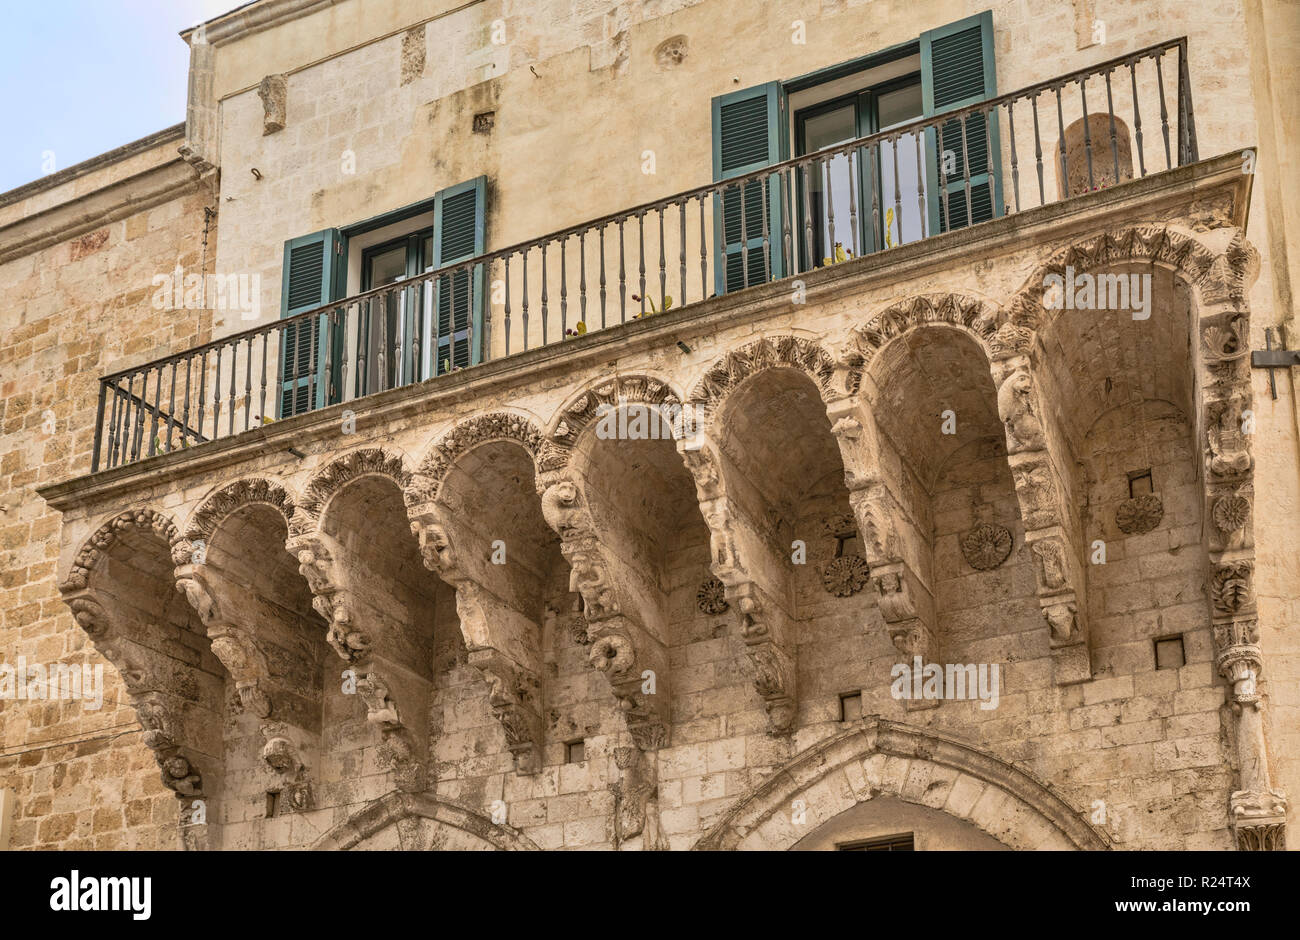 Carved corbels at balcony, Loggia Balsamo, 14th century, in Brindisi, Apulia, Italy Stock Photo